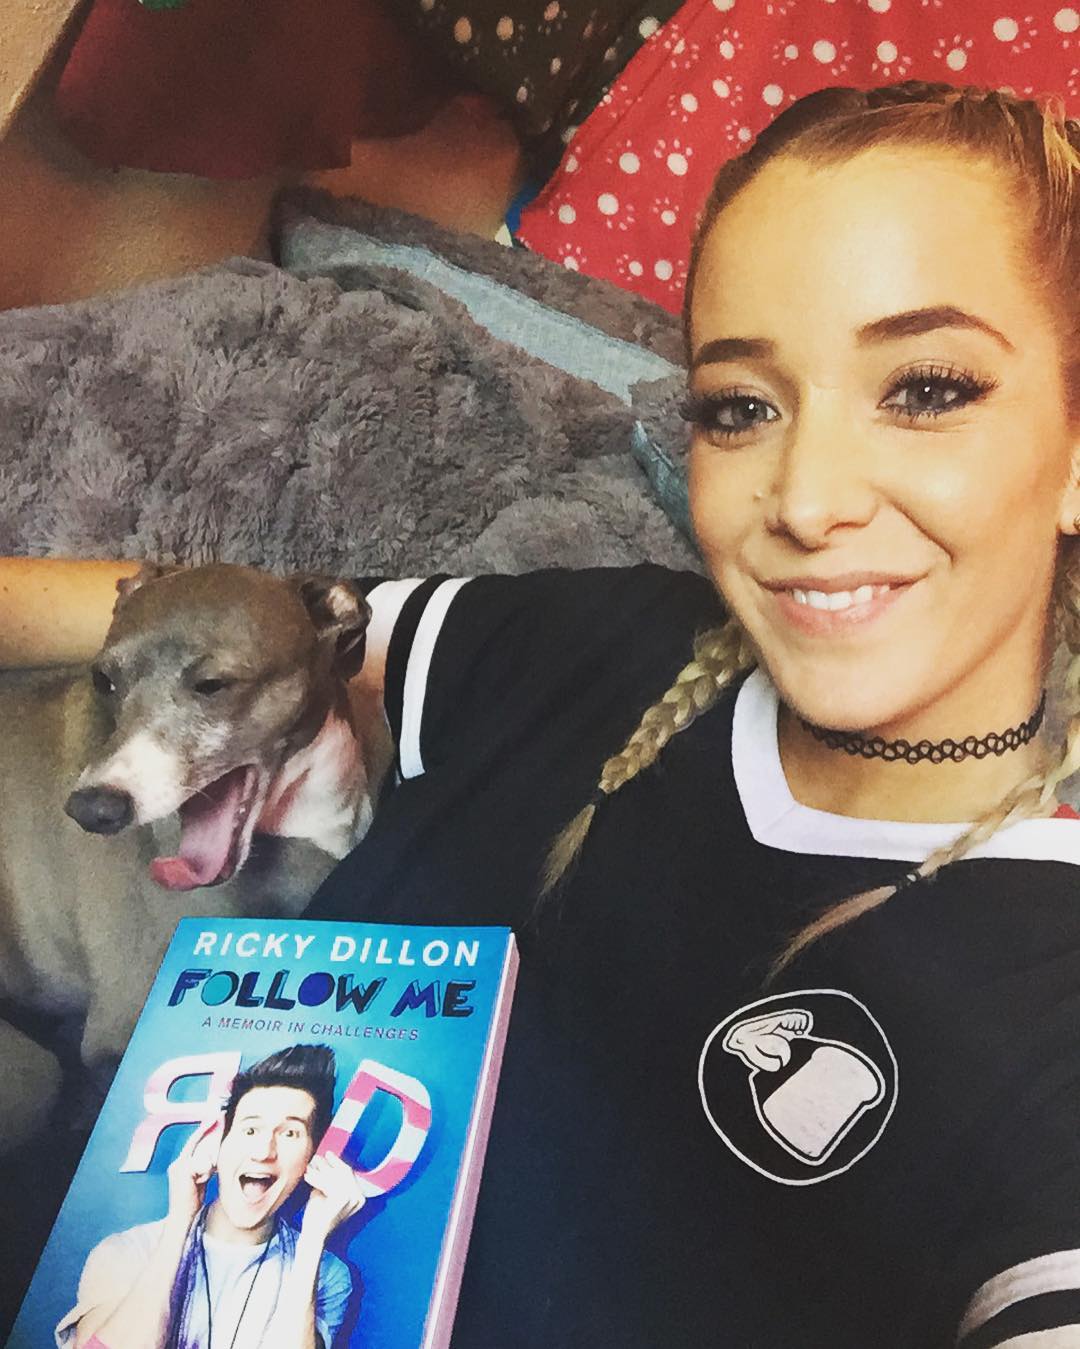 70+ Hot Pictures Of Jenna Marbles Prove She Is The Hottest Youtuber 22